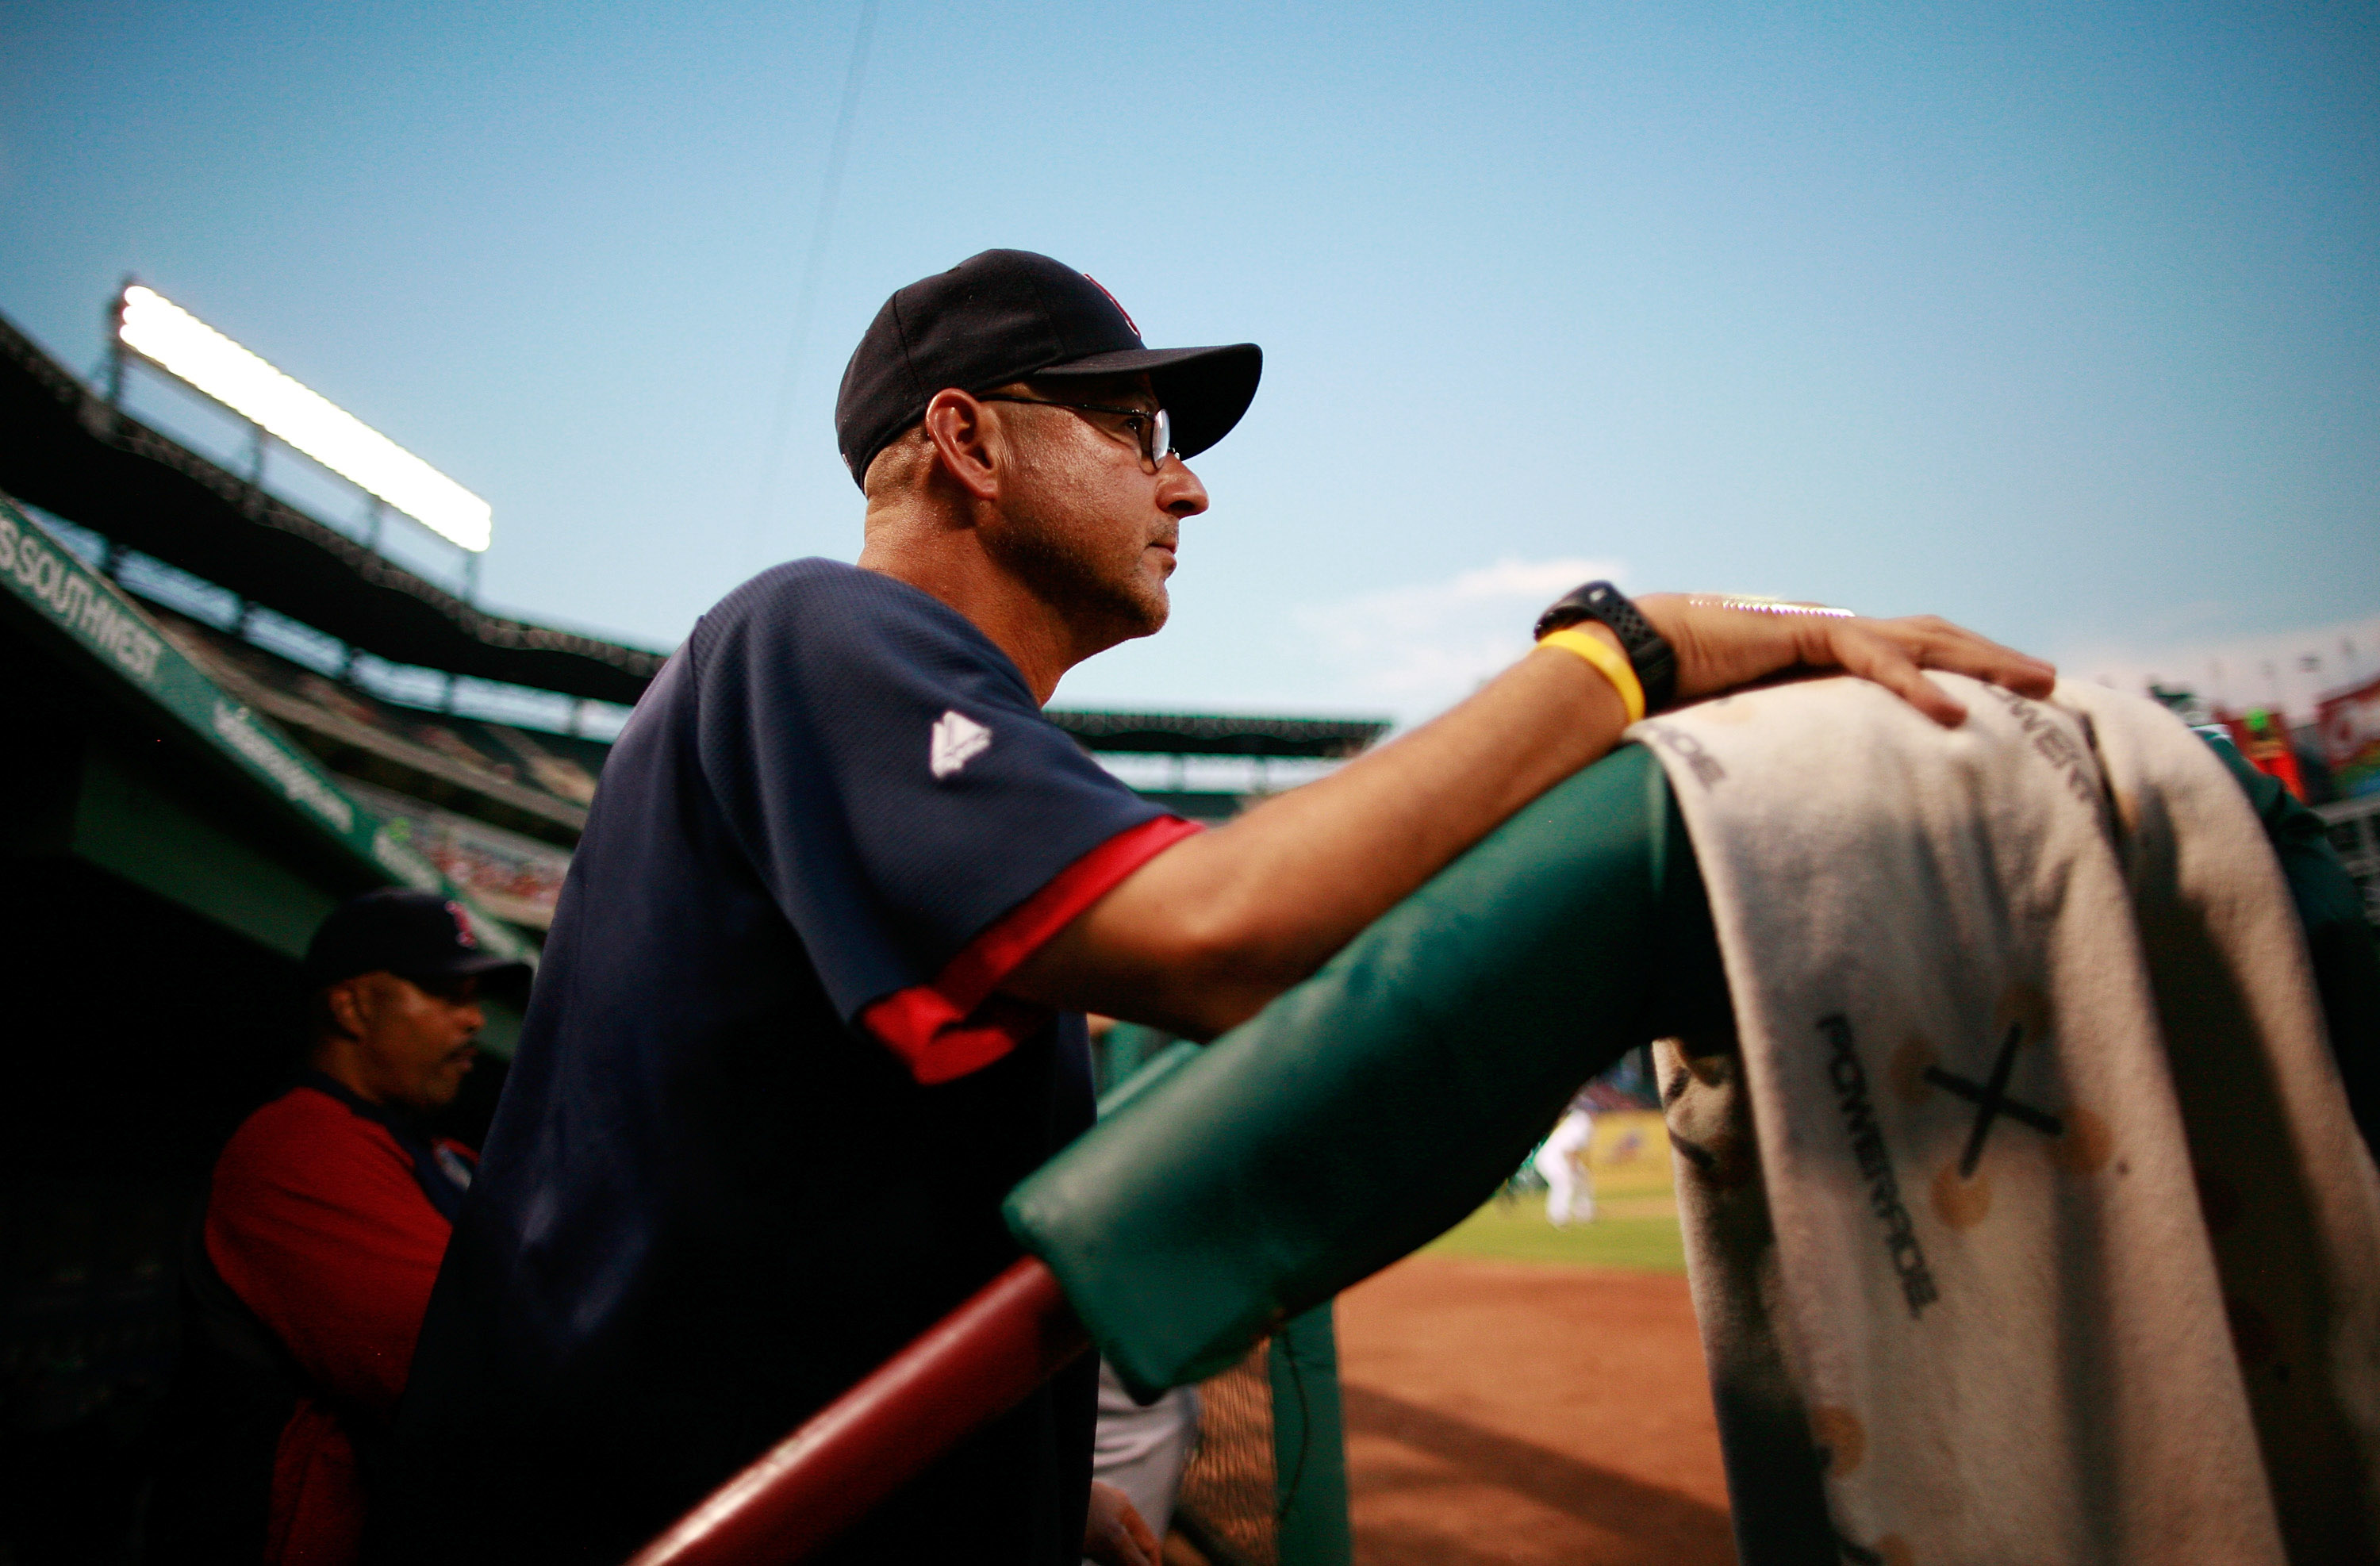 Terry Francona, ex Boston Red Sox manager, had multiple surgeries, spent 4  days in ICU to deal with blood clots over summer 